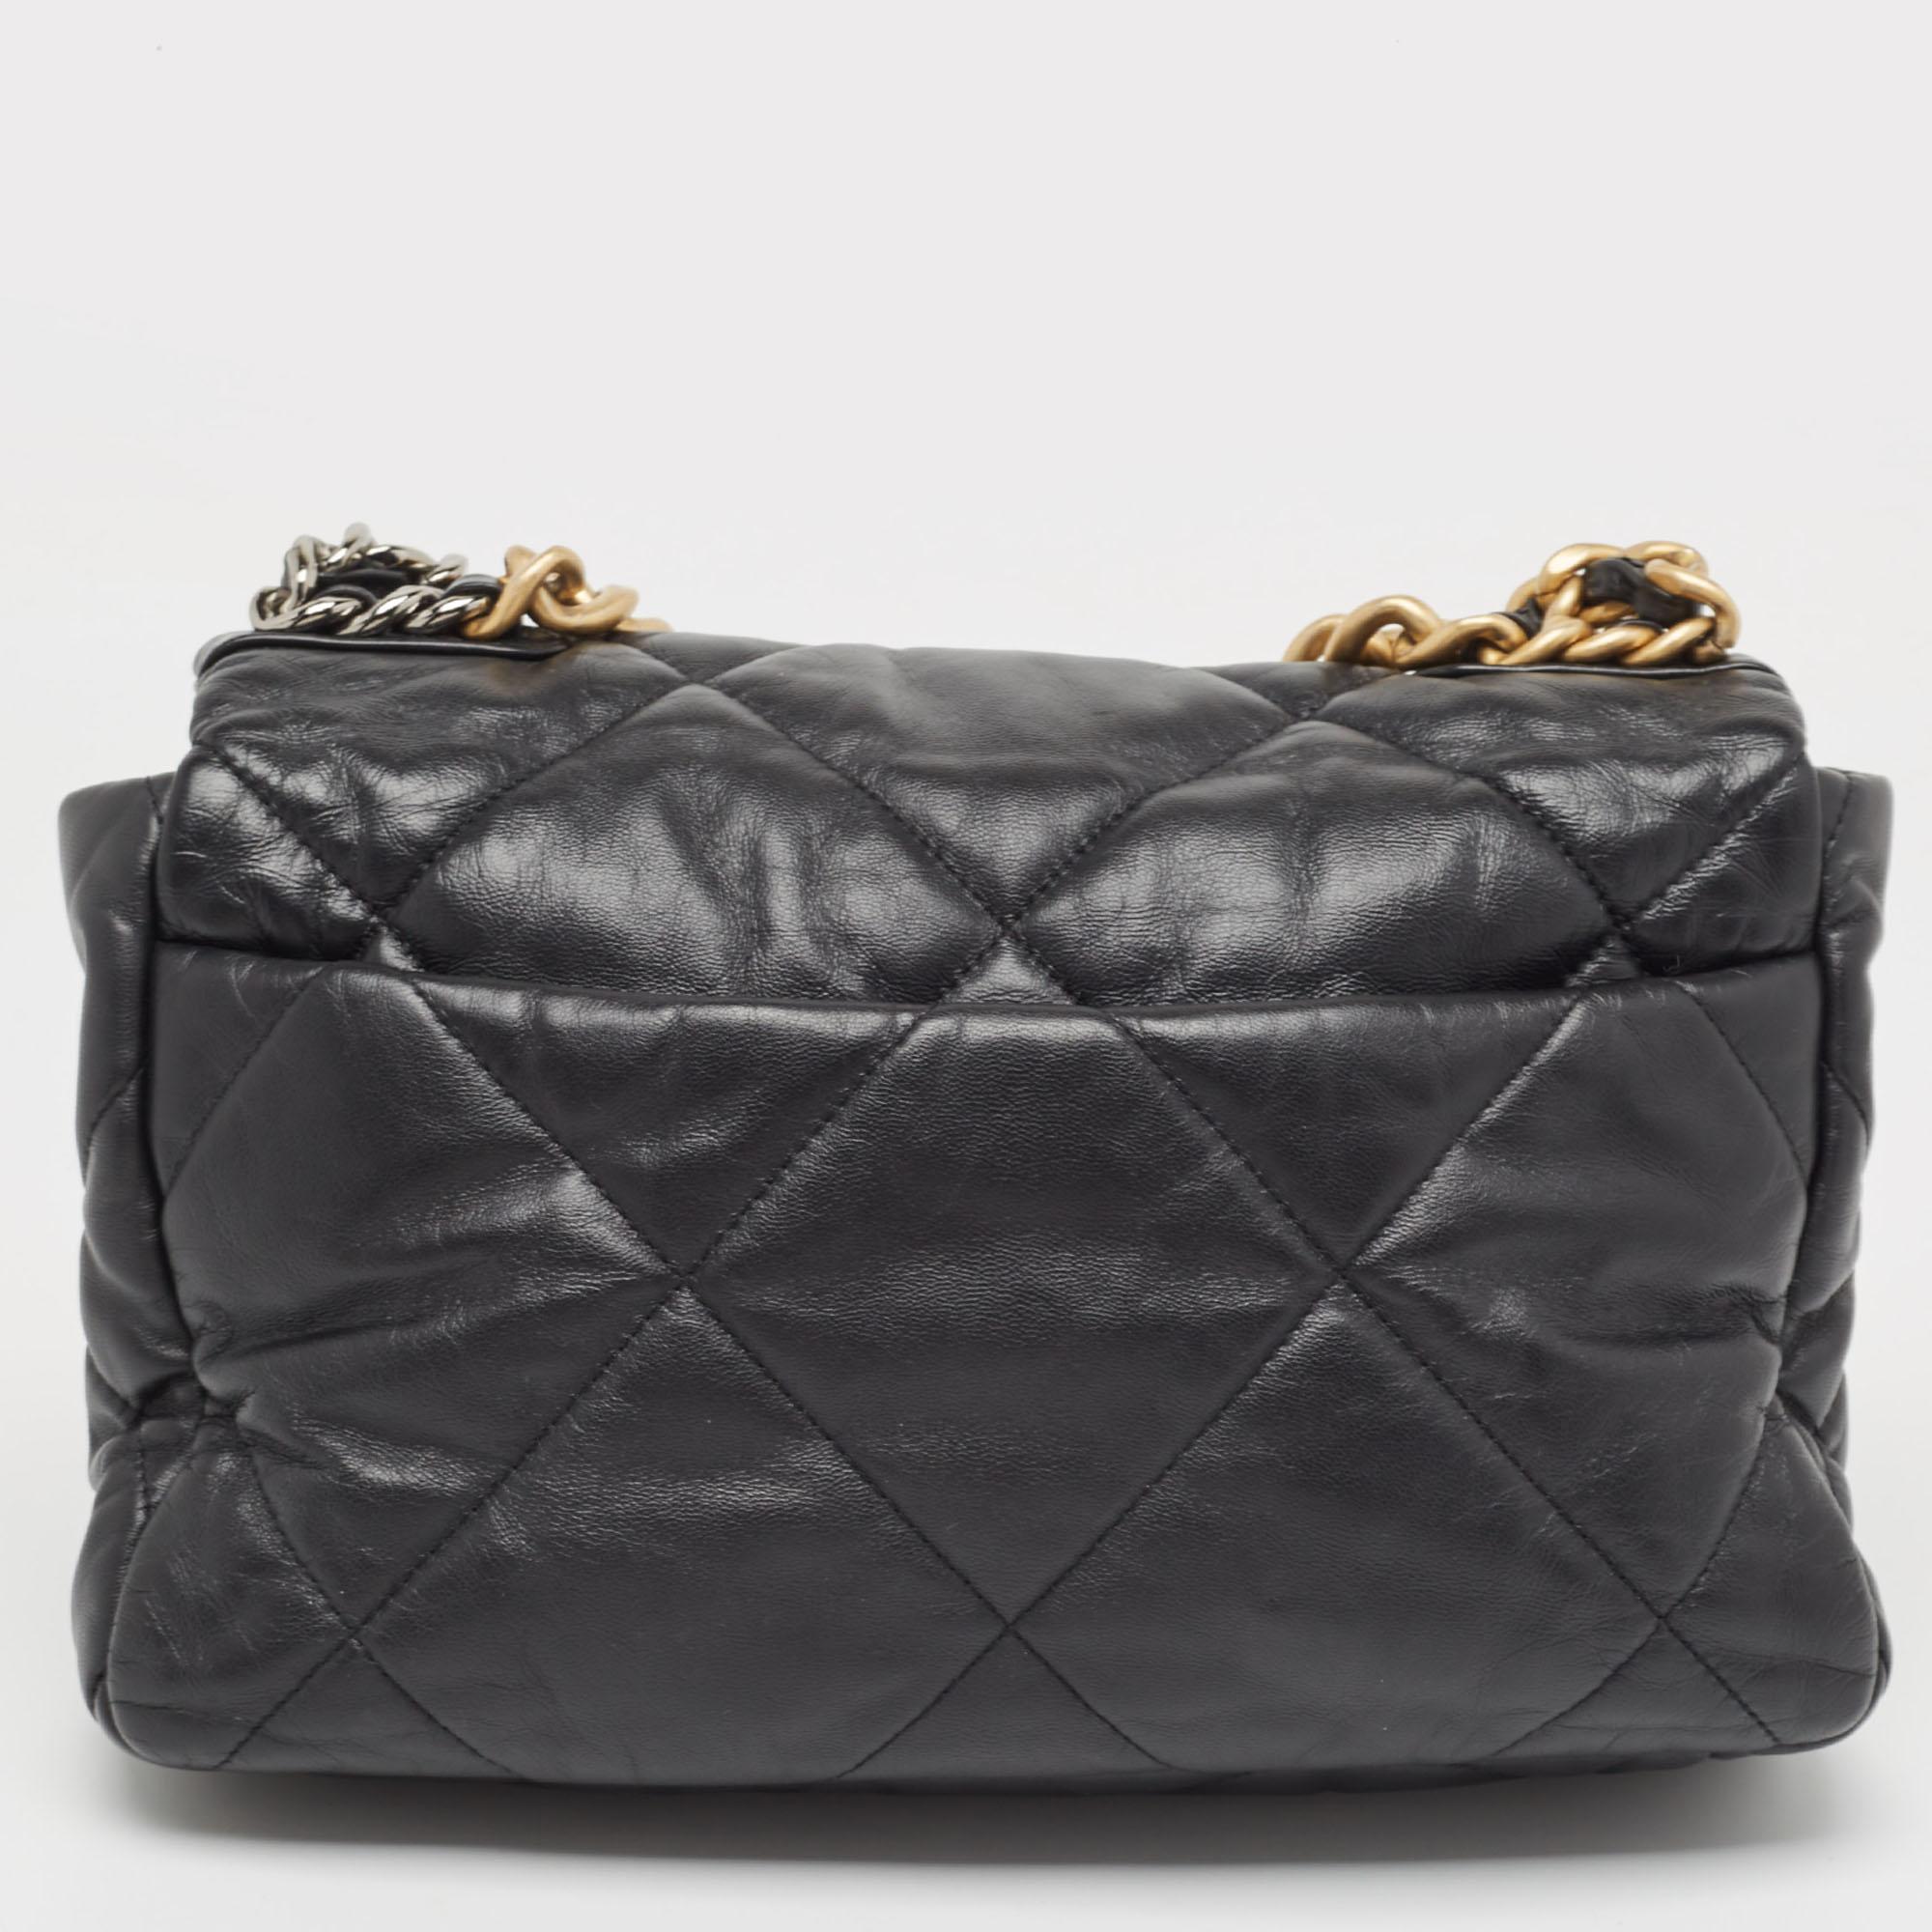 The house of Chanel offers this beautiful 19 flap bag in black to help you create timeless style edits every season. Crafted with quality materials, this piece will last you a long time.

Includes: Original Dustbag

